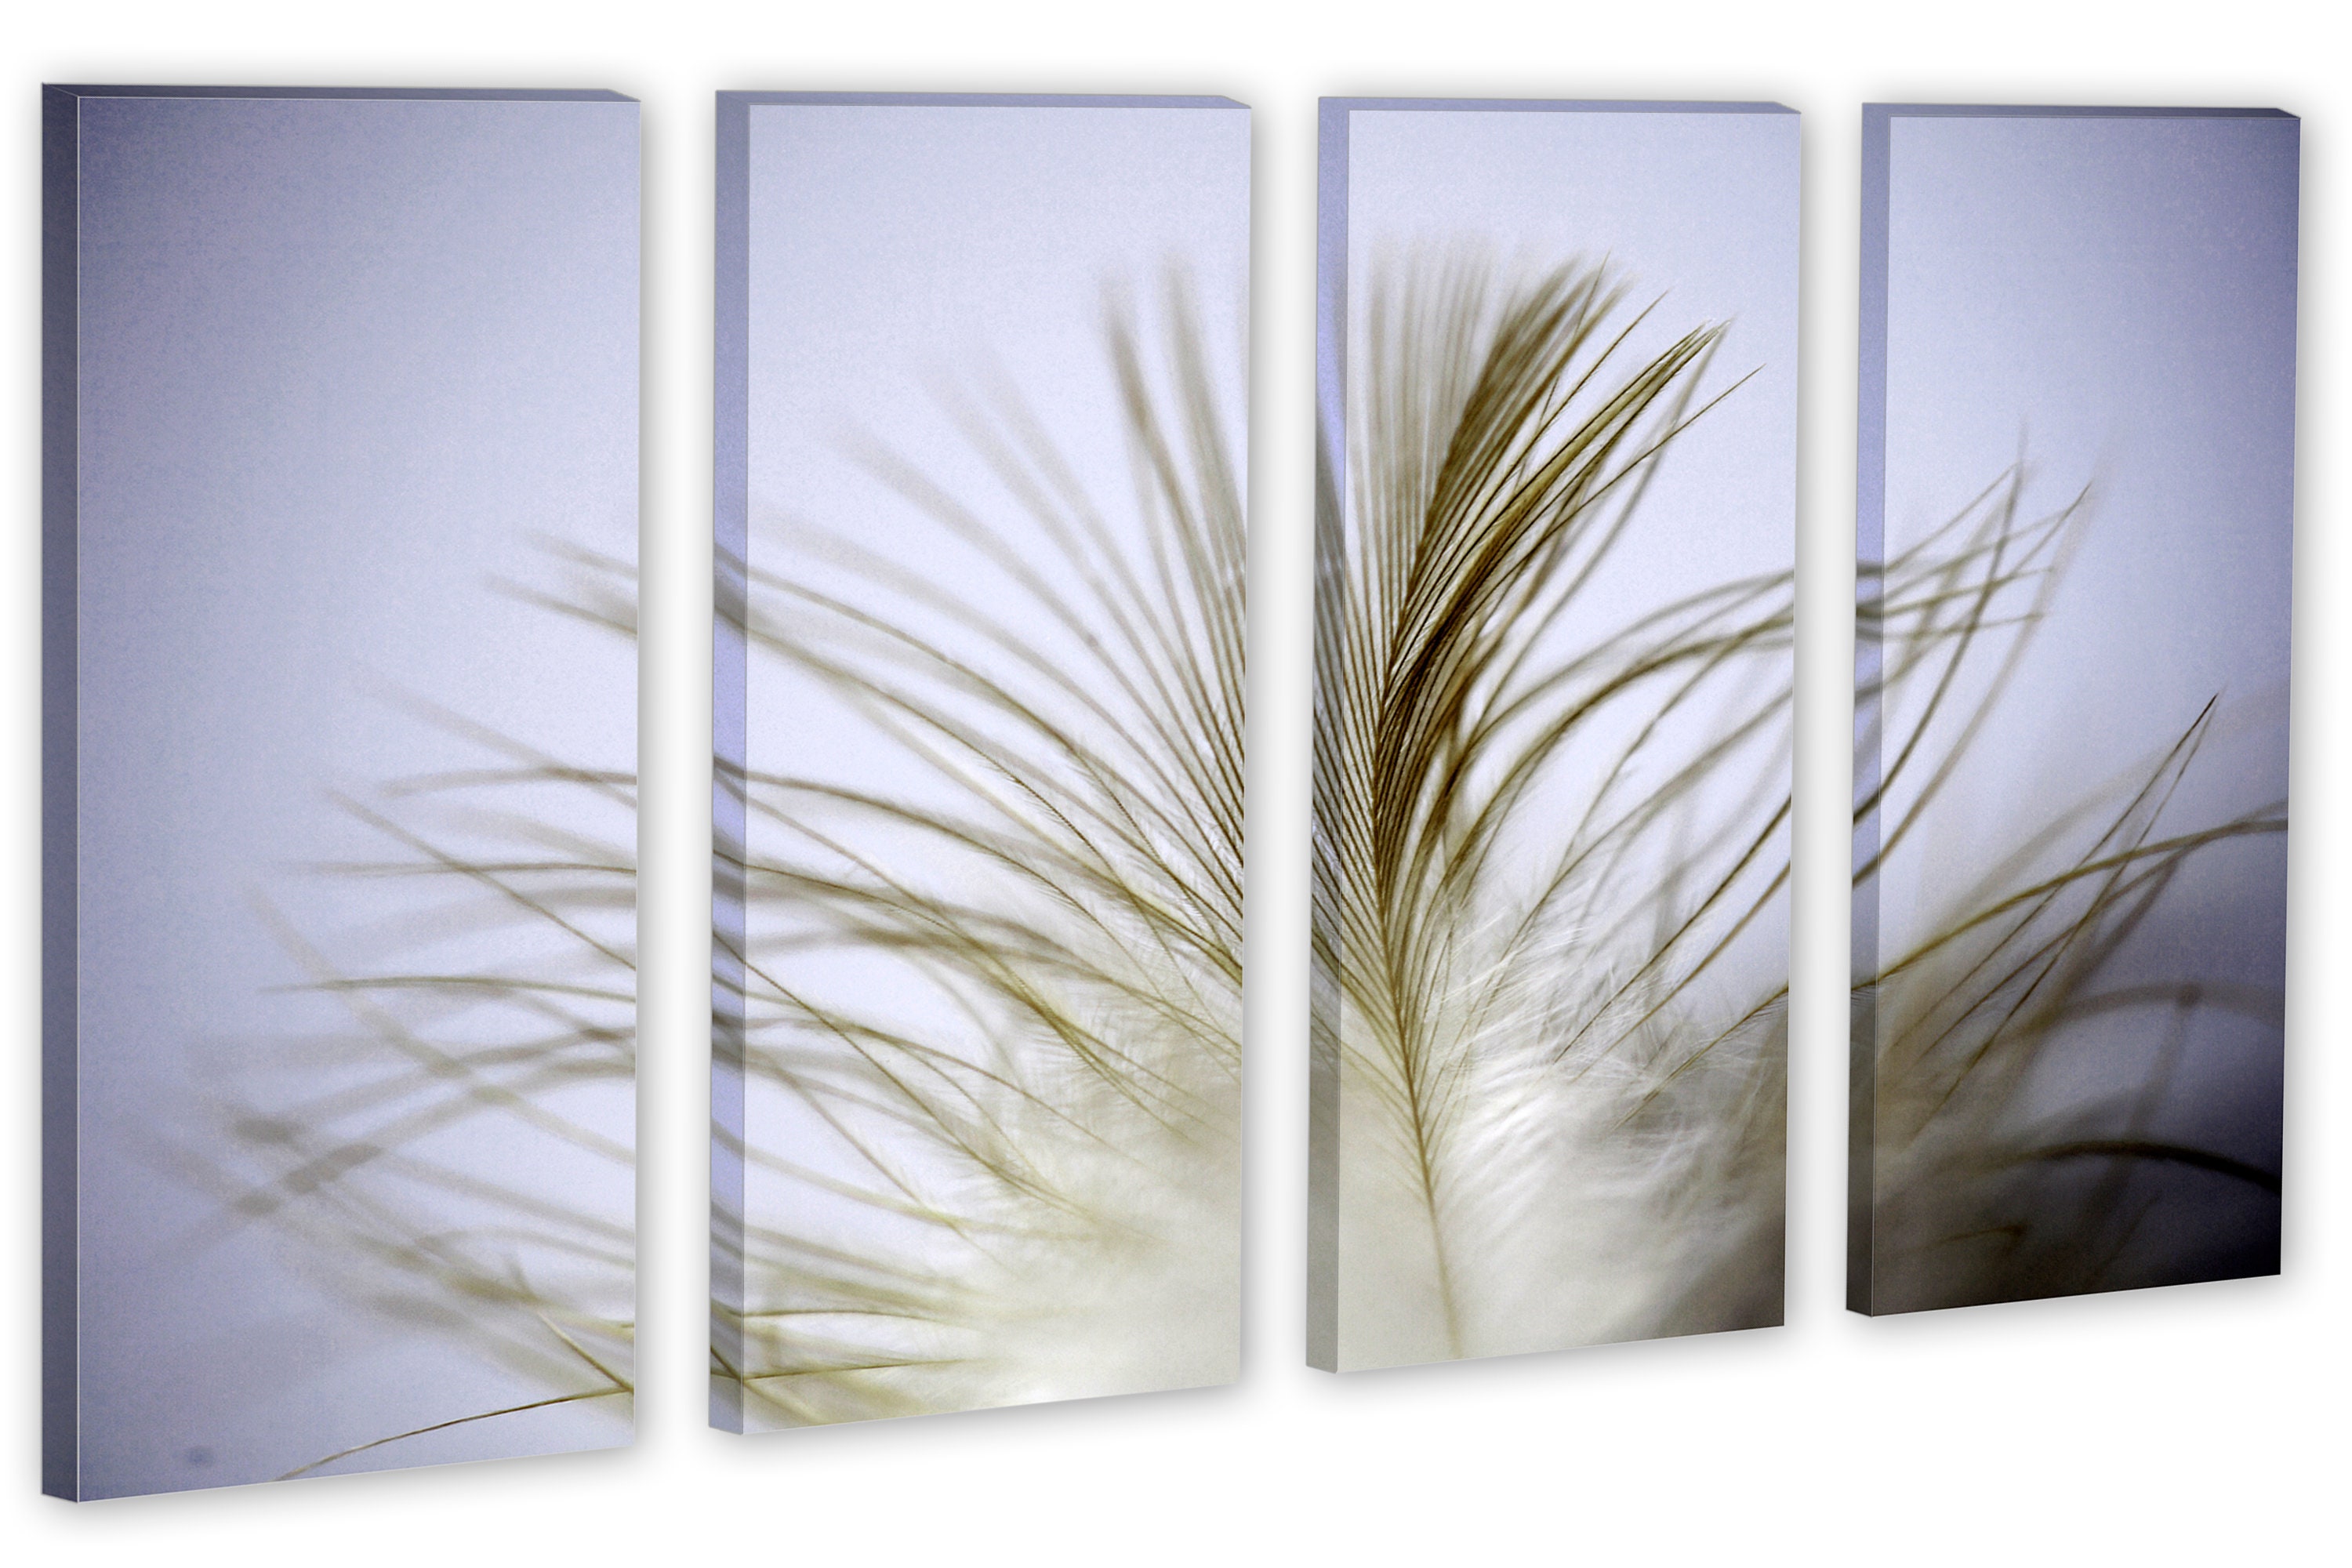 Feather Canvas Print Wall Art 3 Panel Split Triptych. Wall - Etsy